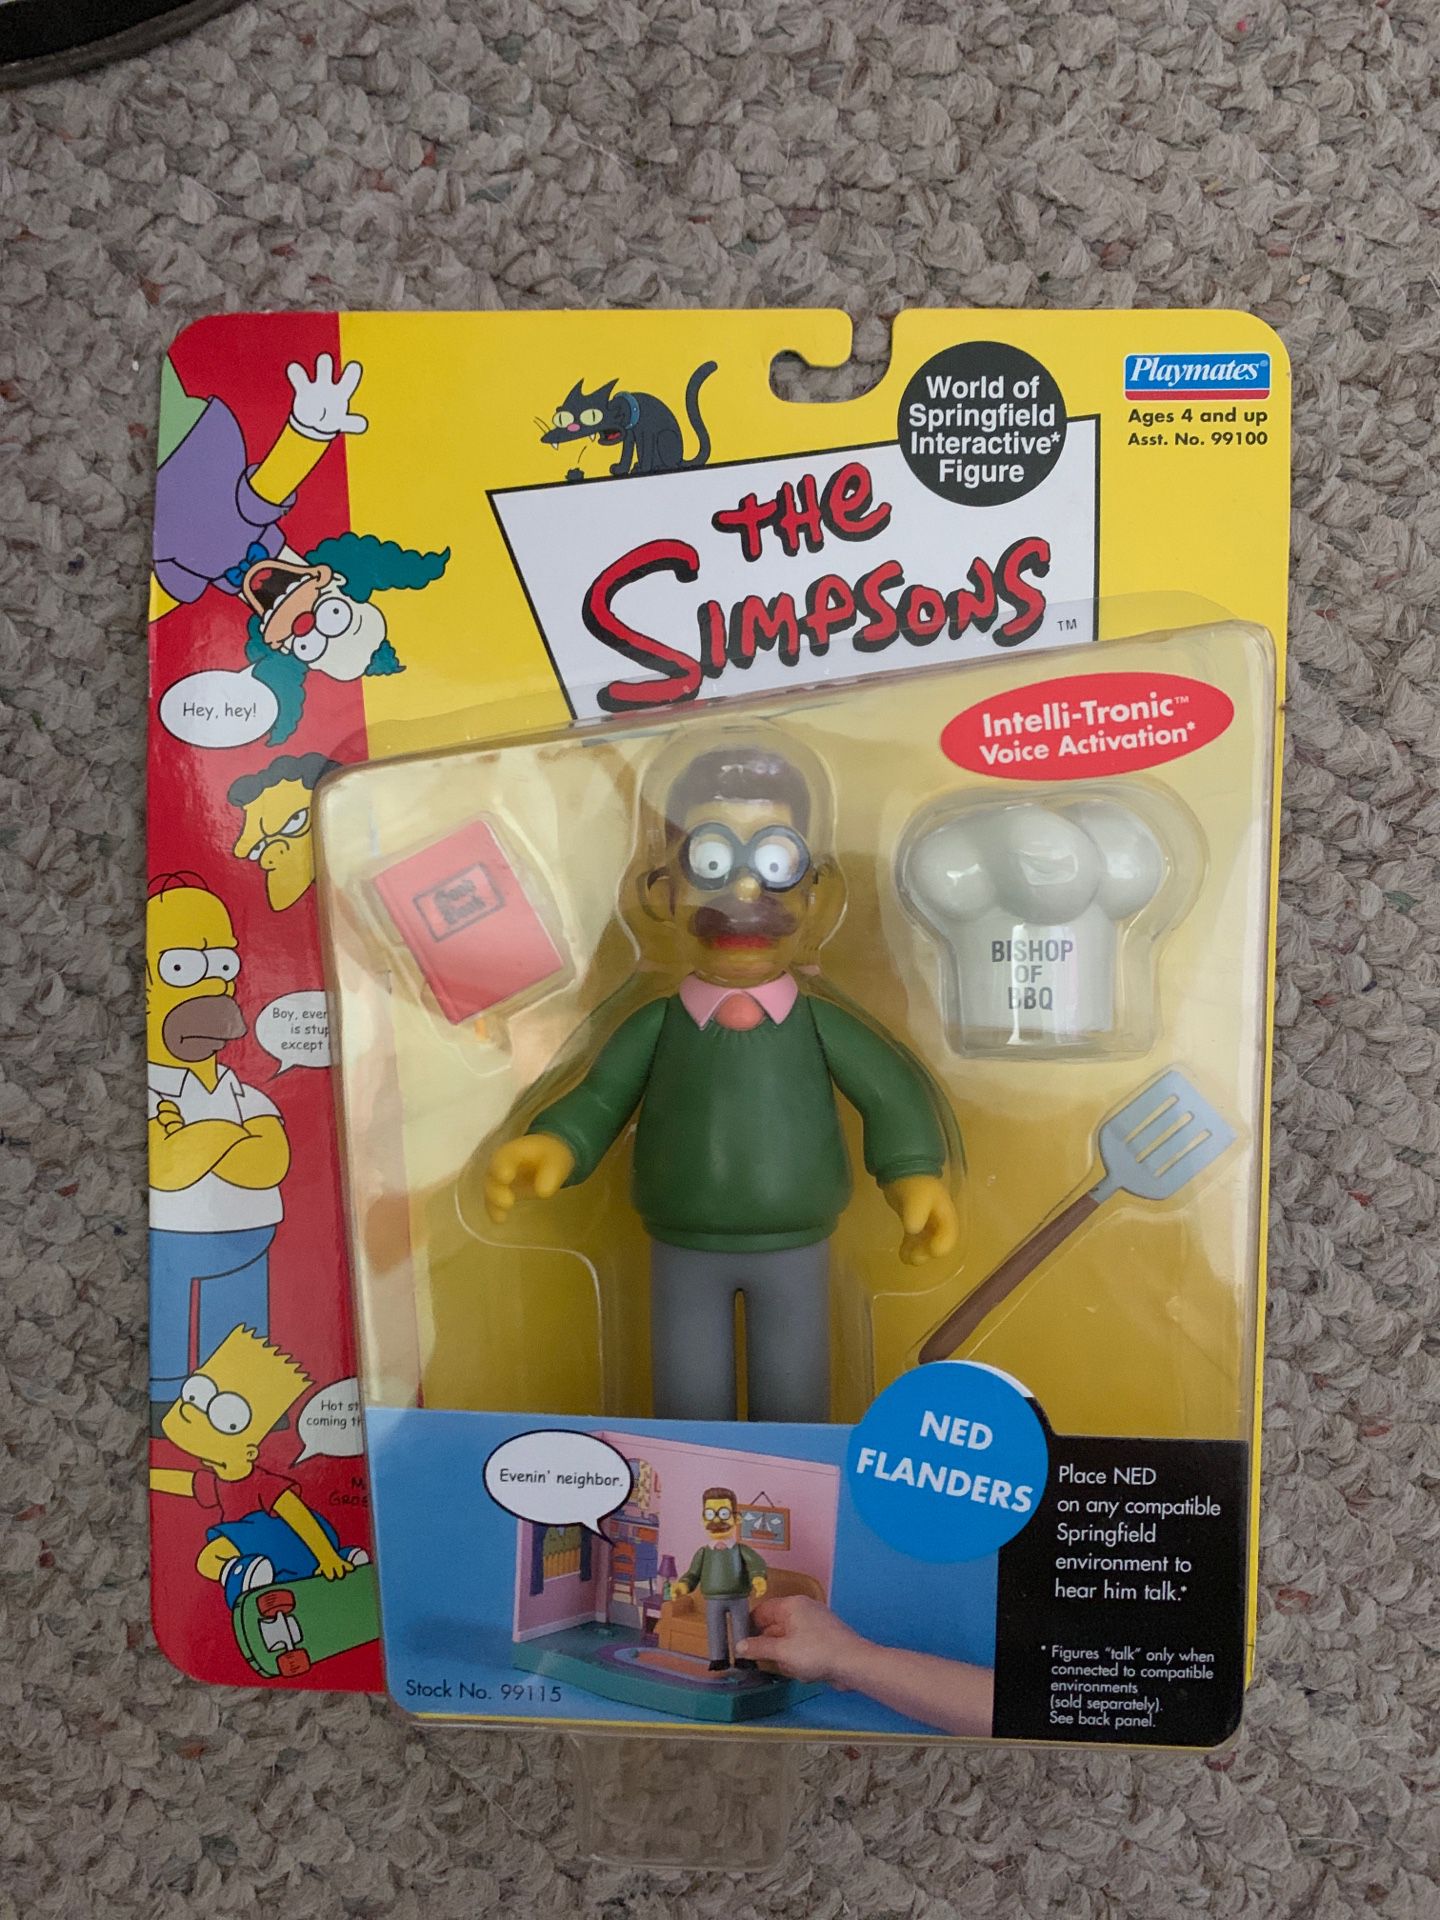 2000 Ned Flanders Playmates Toy Figure The Simpsons